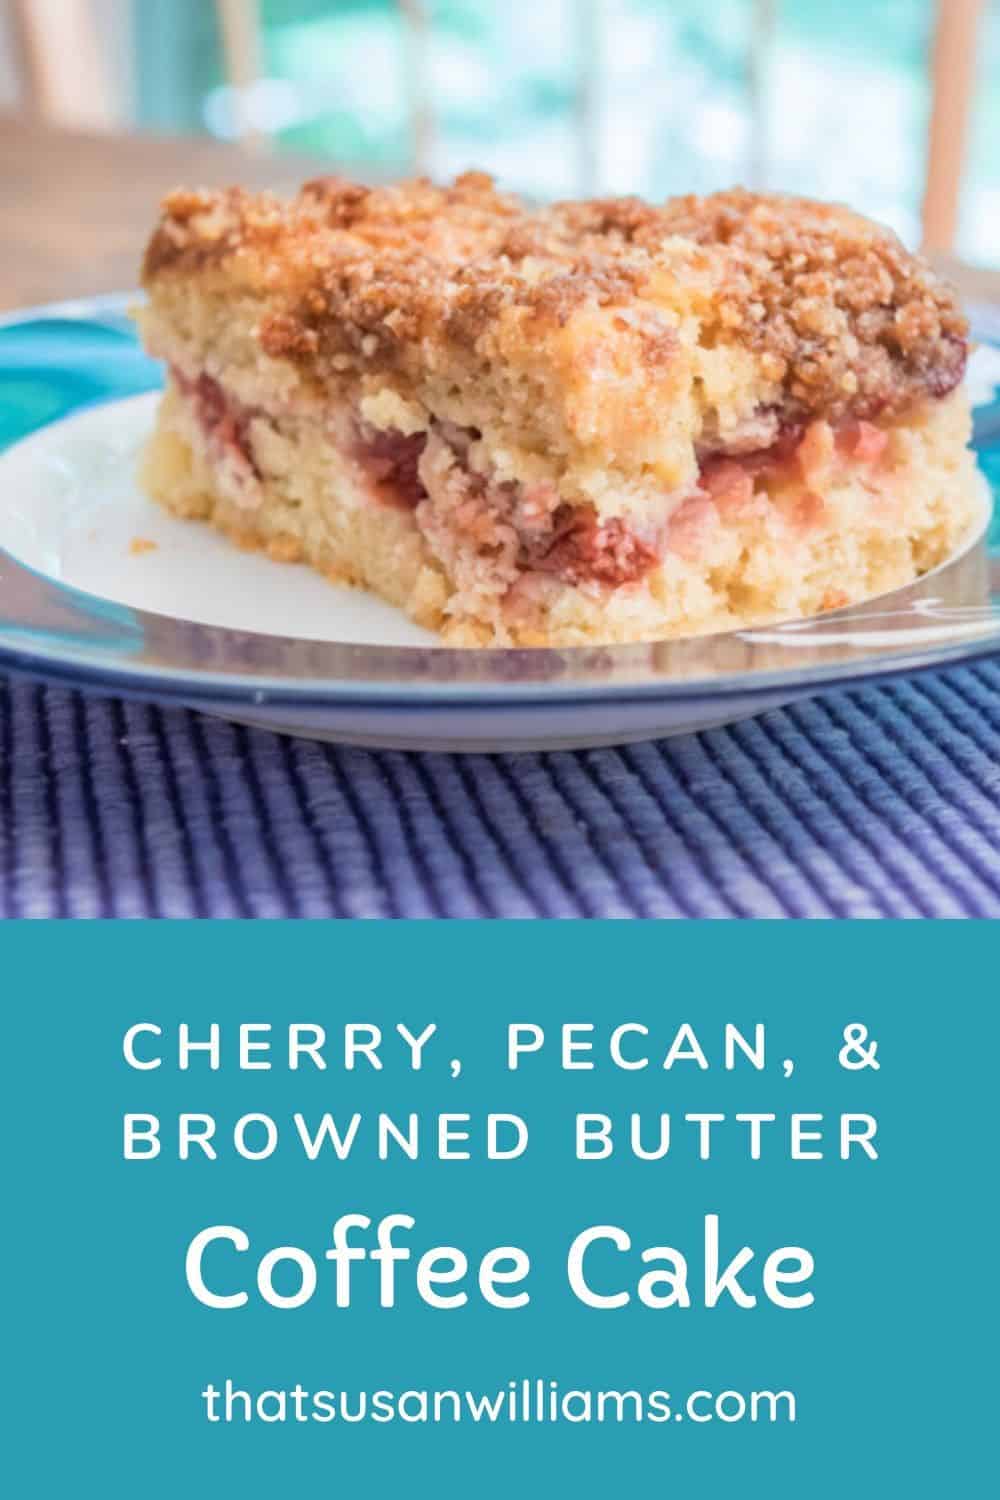 Coffee Cake with Cherries, Pecans, and Browned Butter